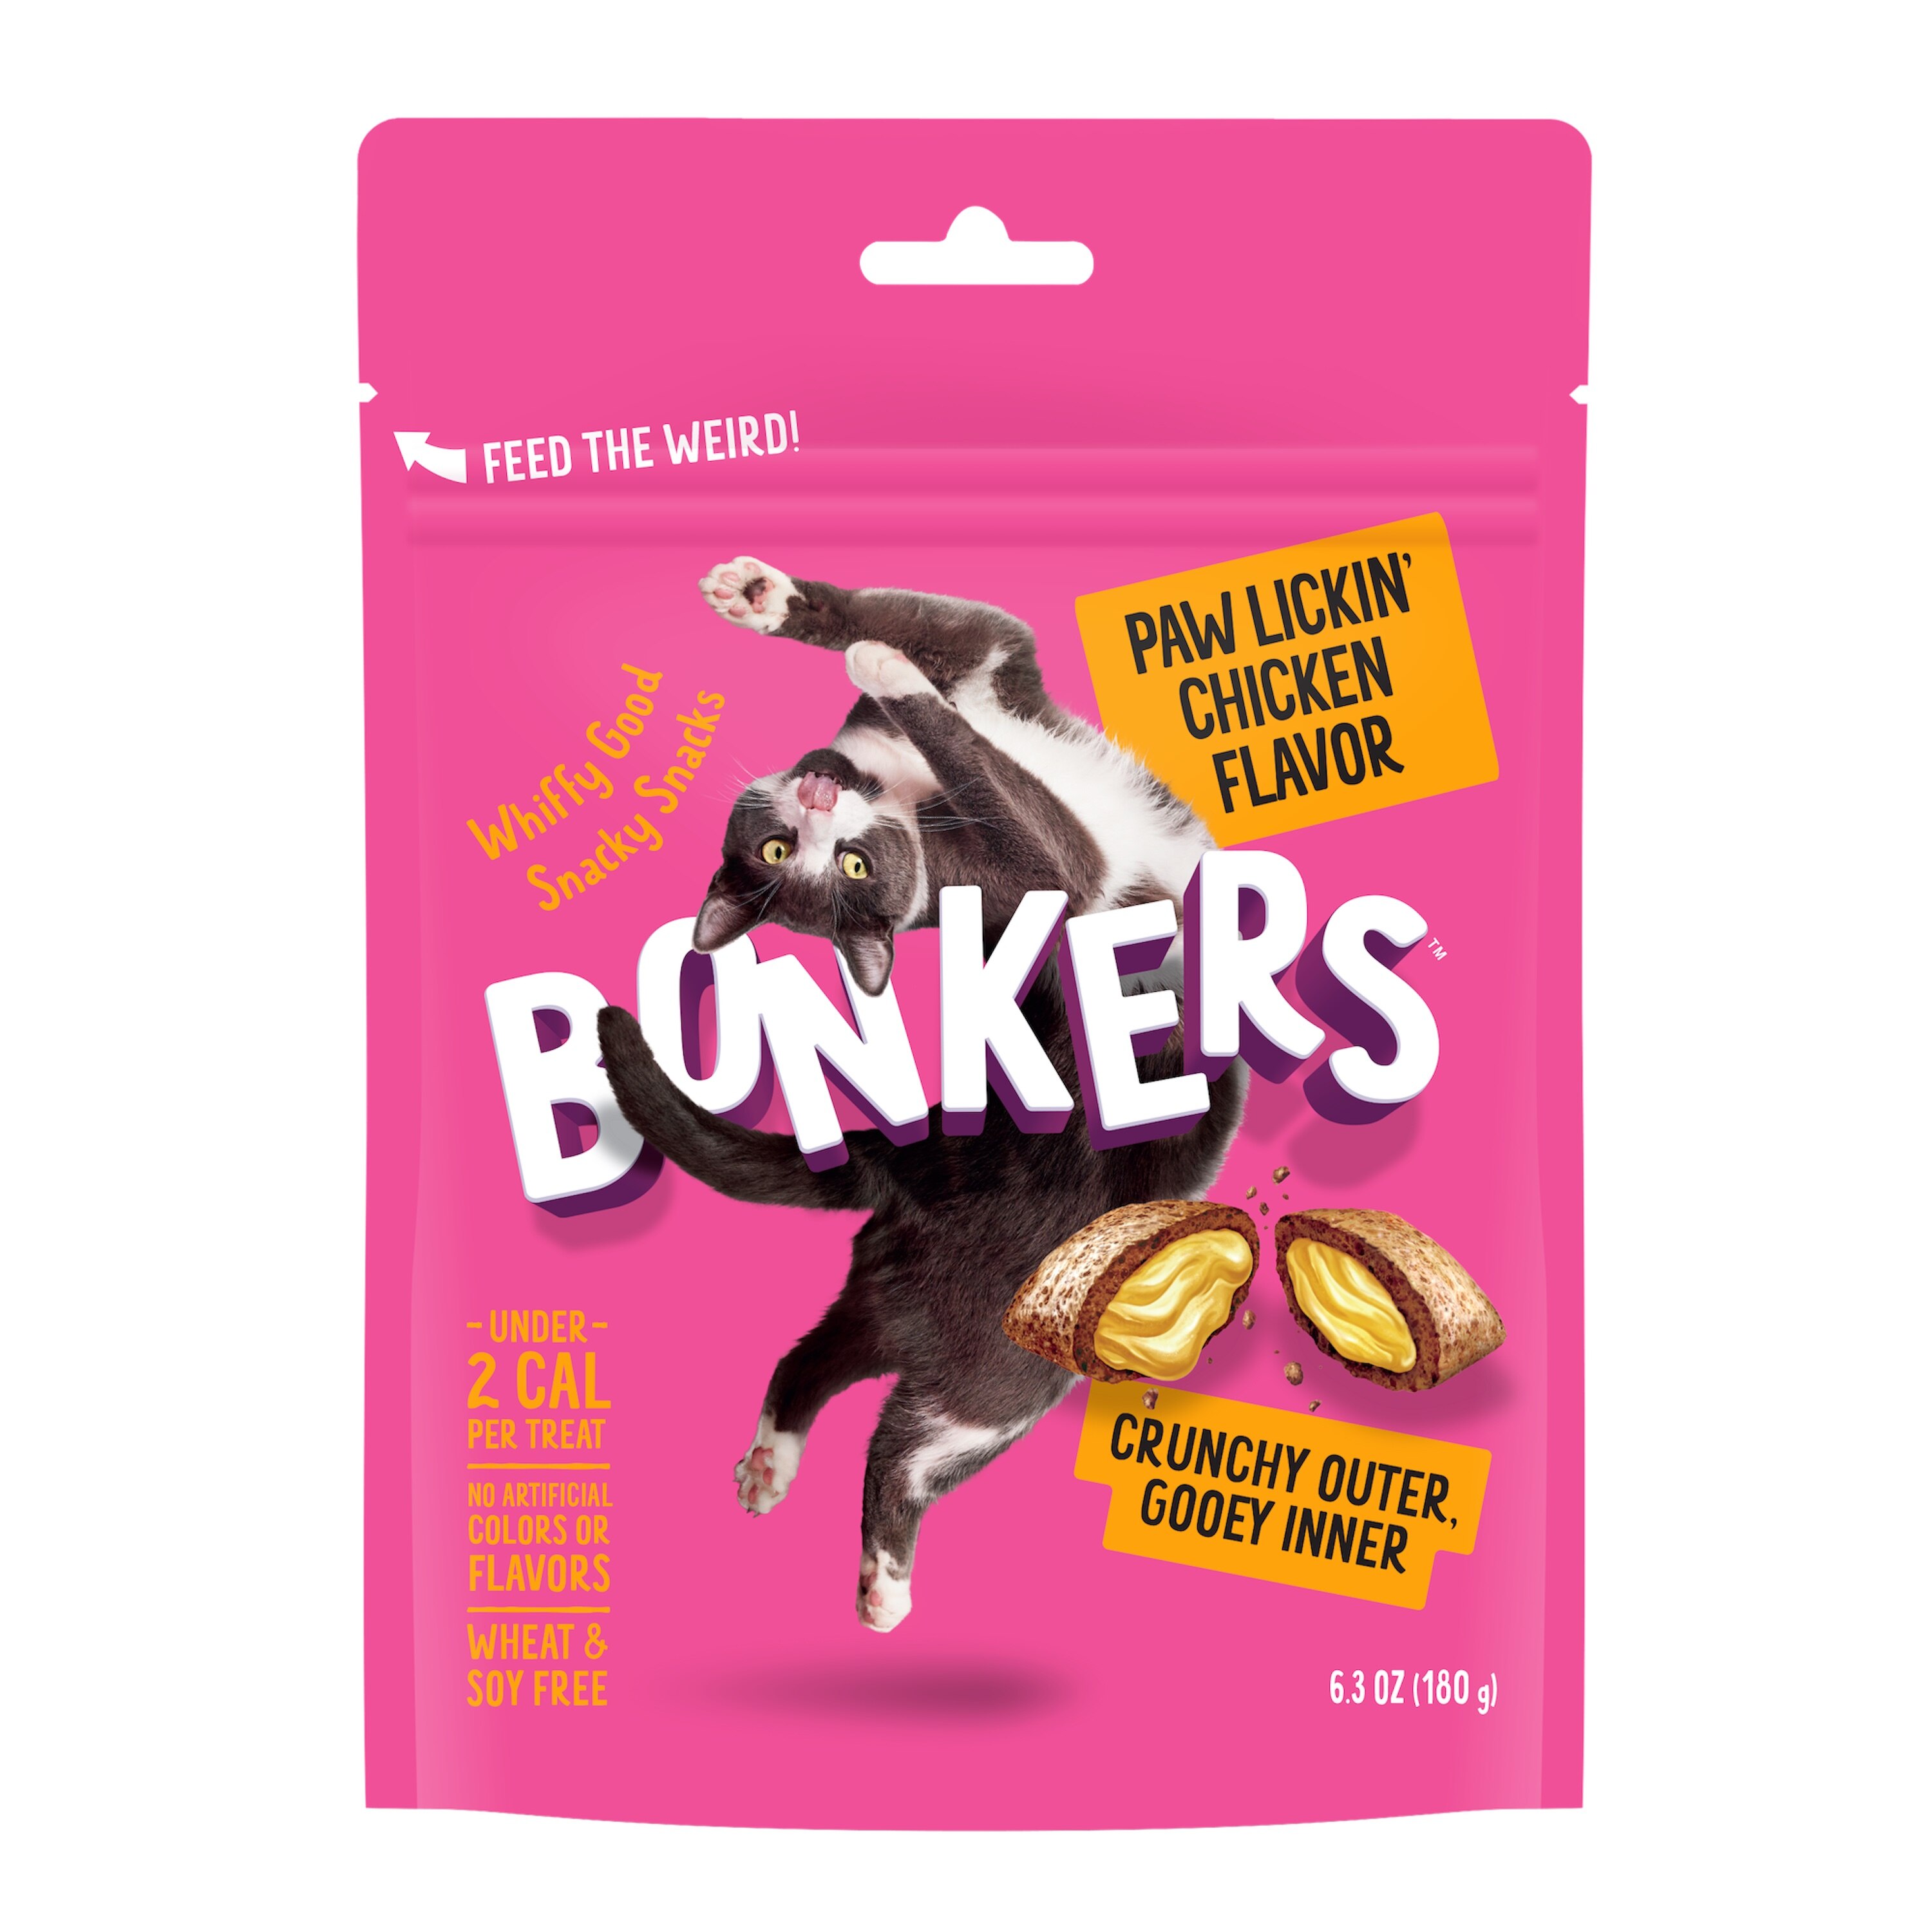 BONKERS Crunchy And Soft Cat Treats, Paw Lickin' Chicken Flavor, 6.3 Oz , CVS